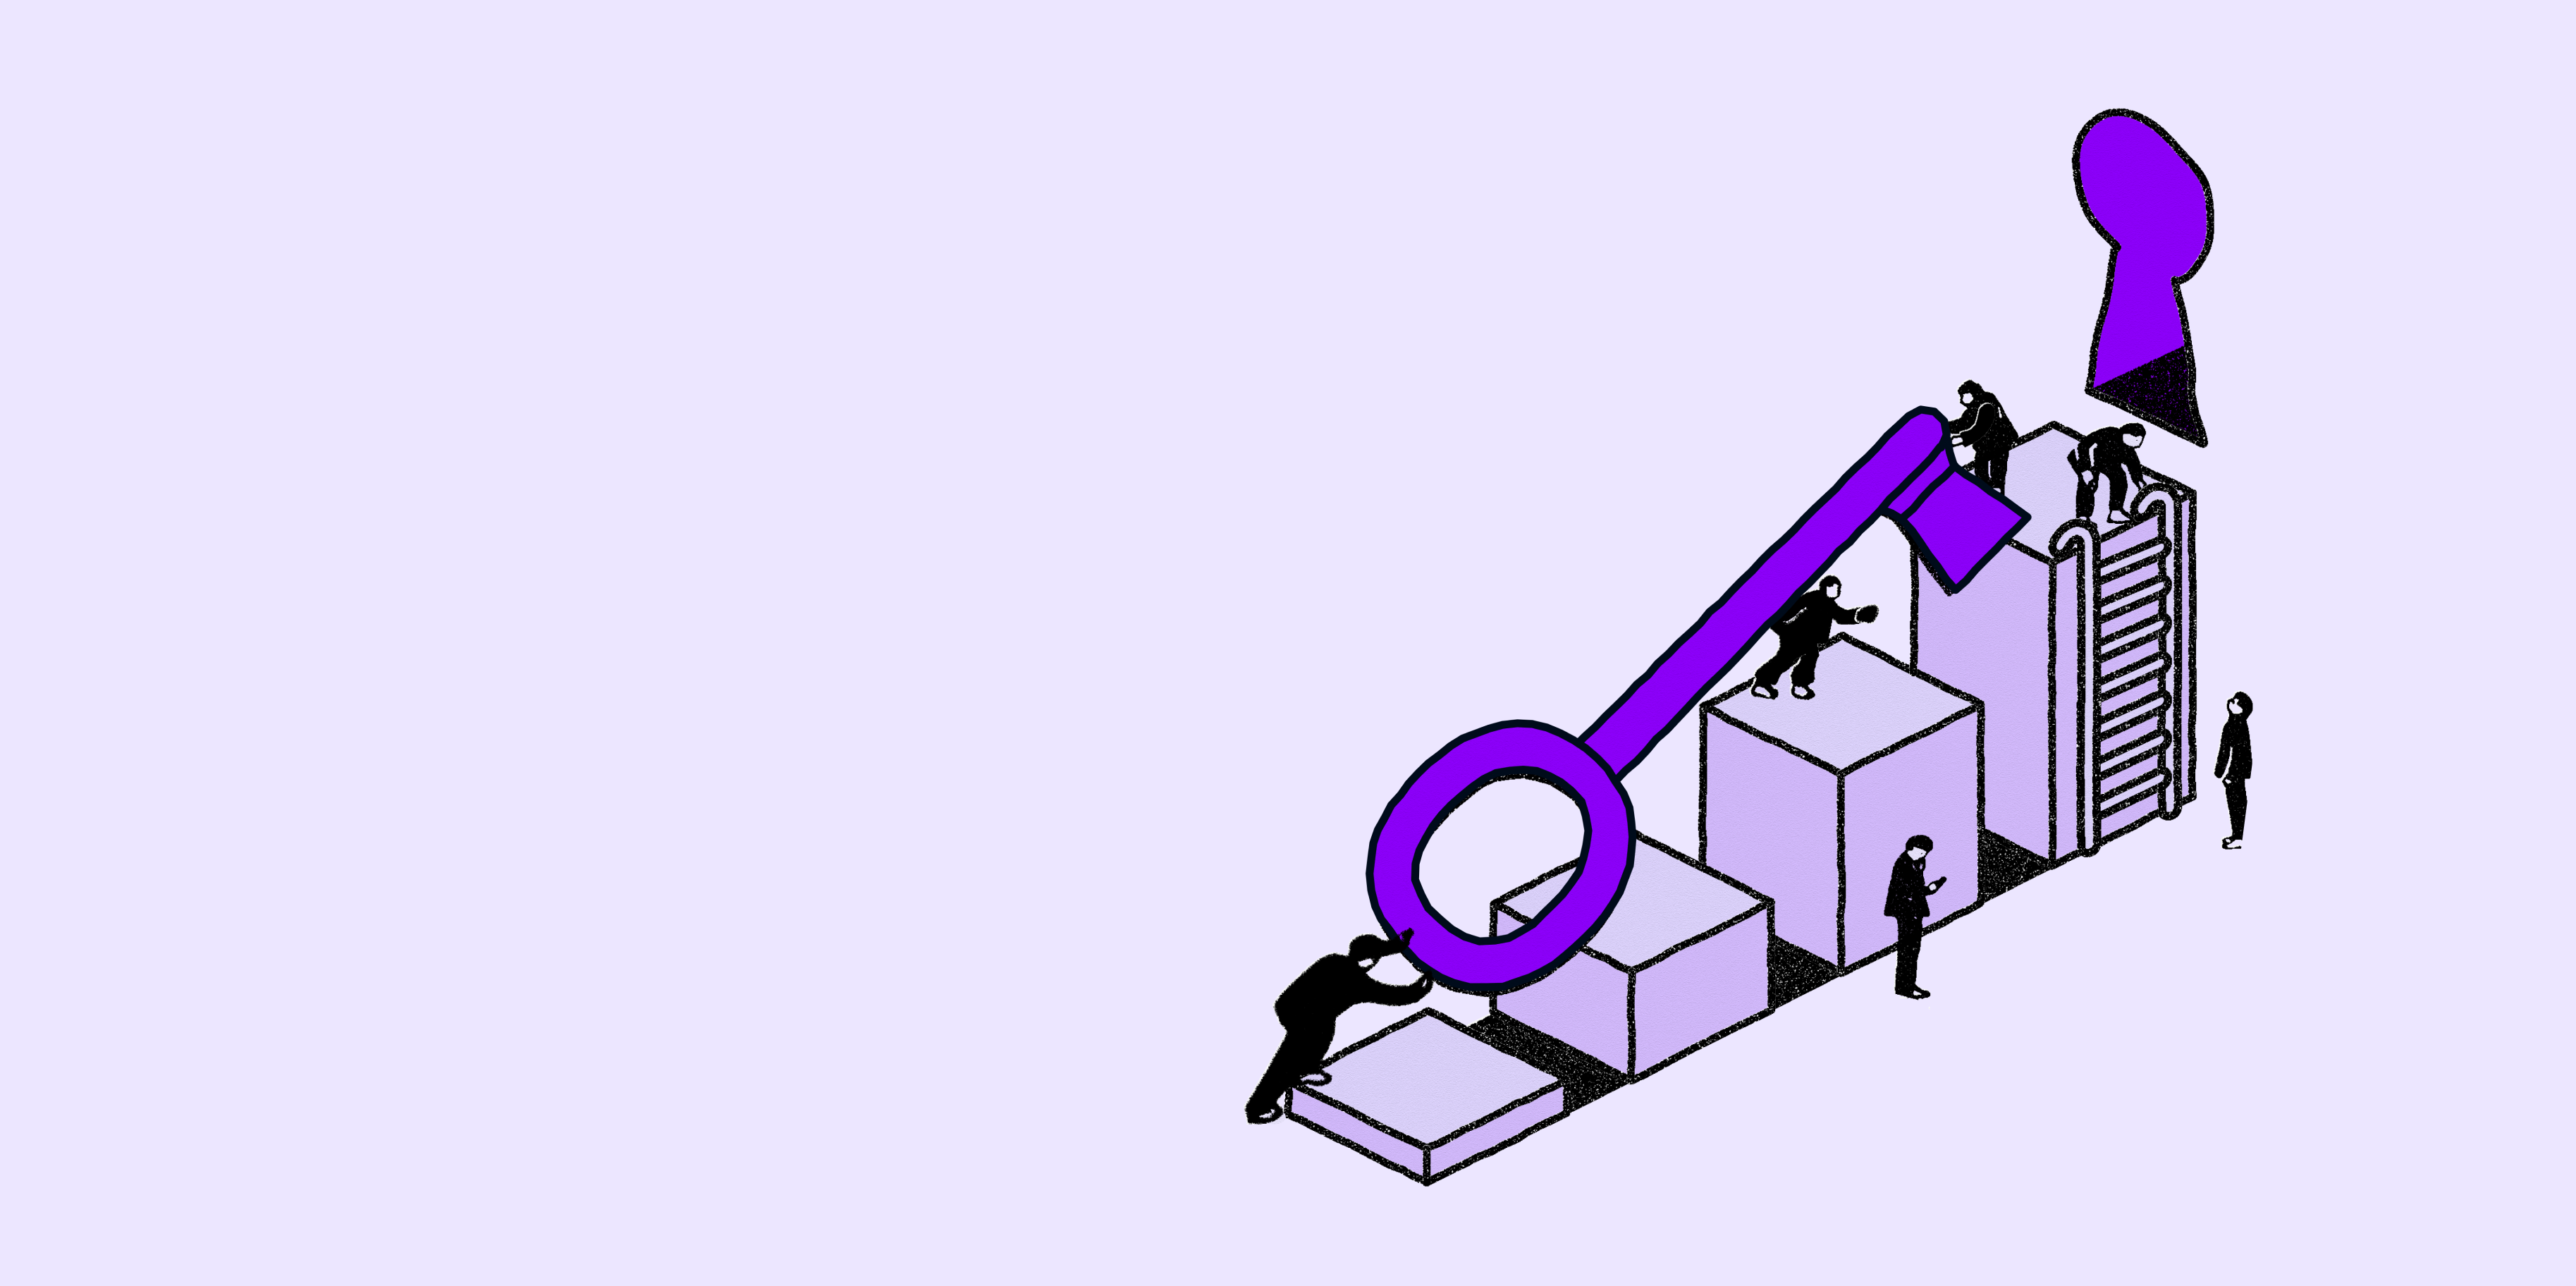 Illustration showing black and white figures carrying a large purple key up a set of ascending blocks towards a keyhole set on a light purple background